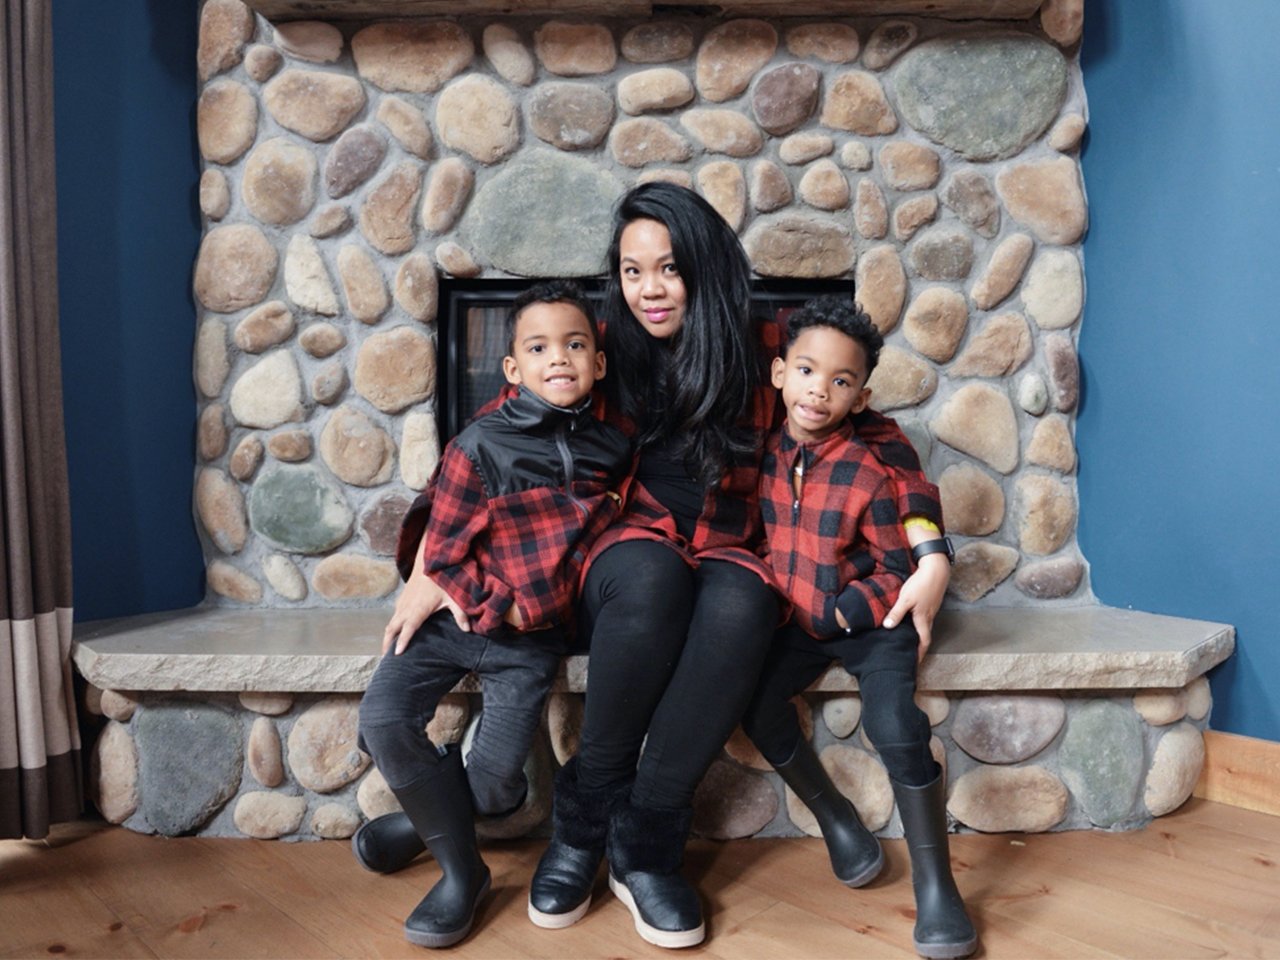 Sunshine and her boys posing on the fireplace in matching plaid